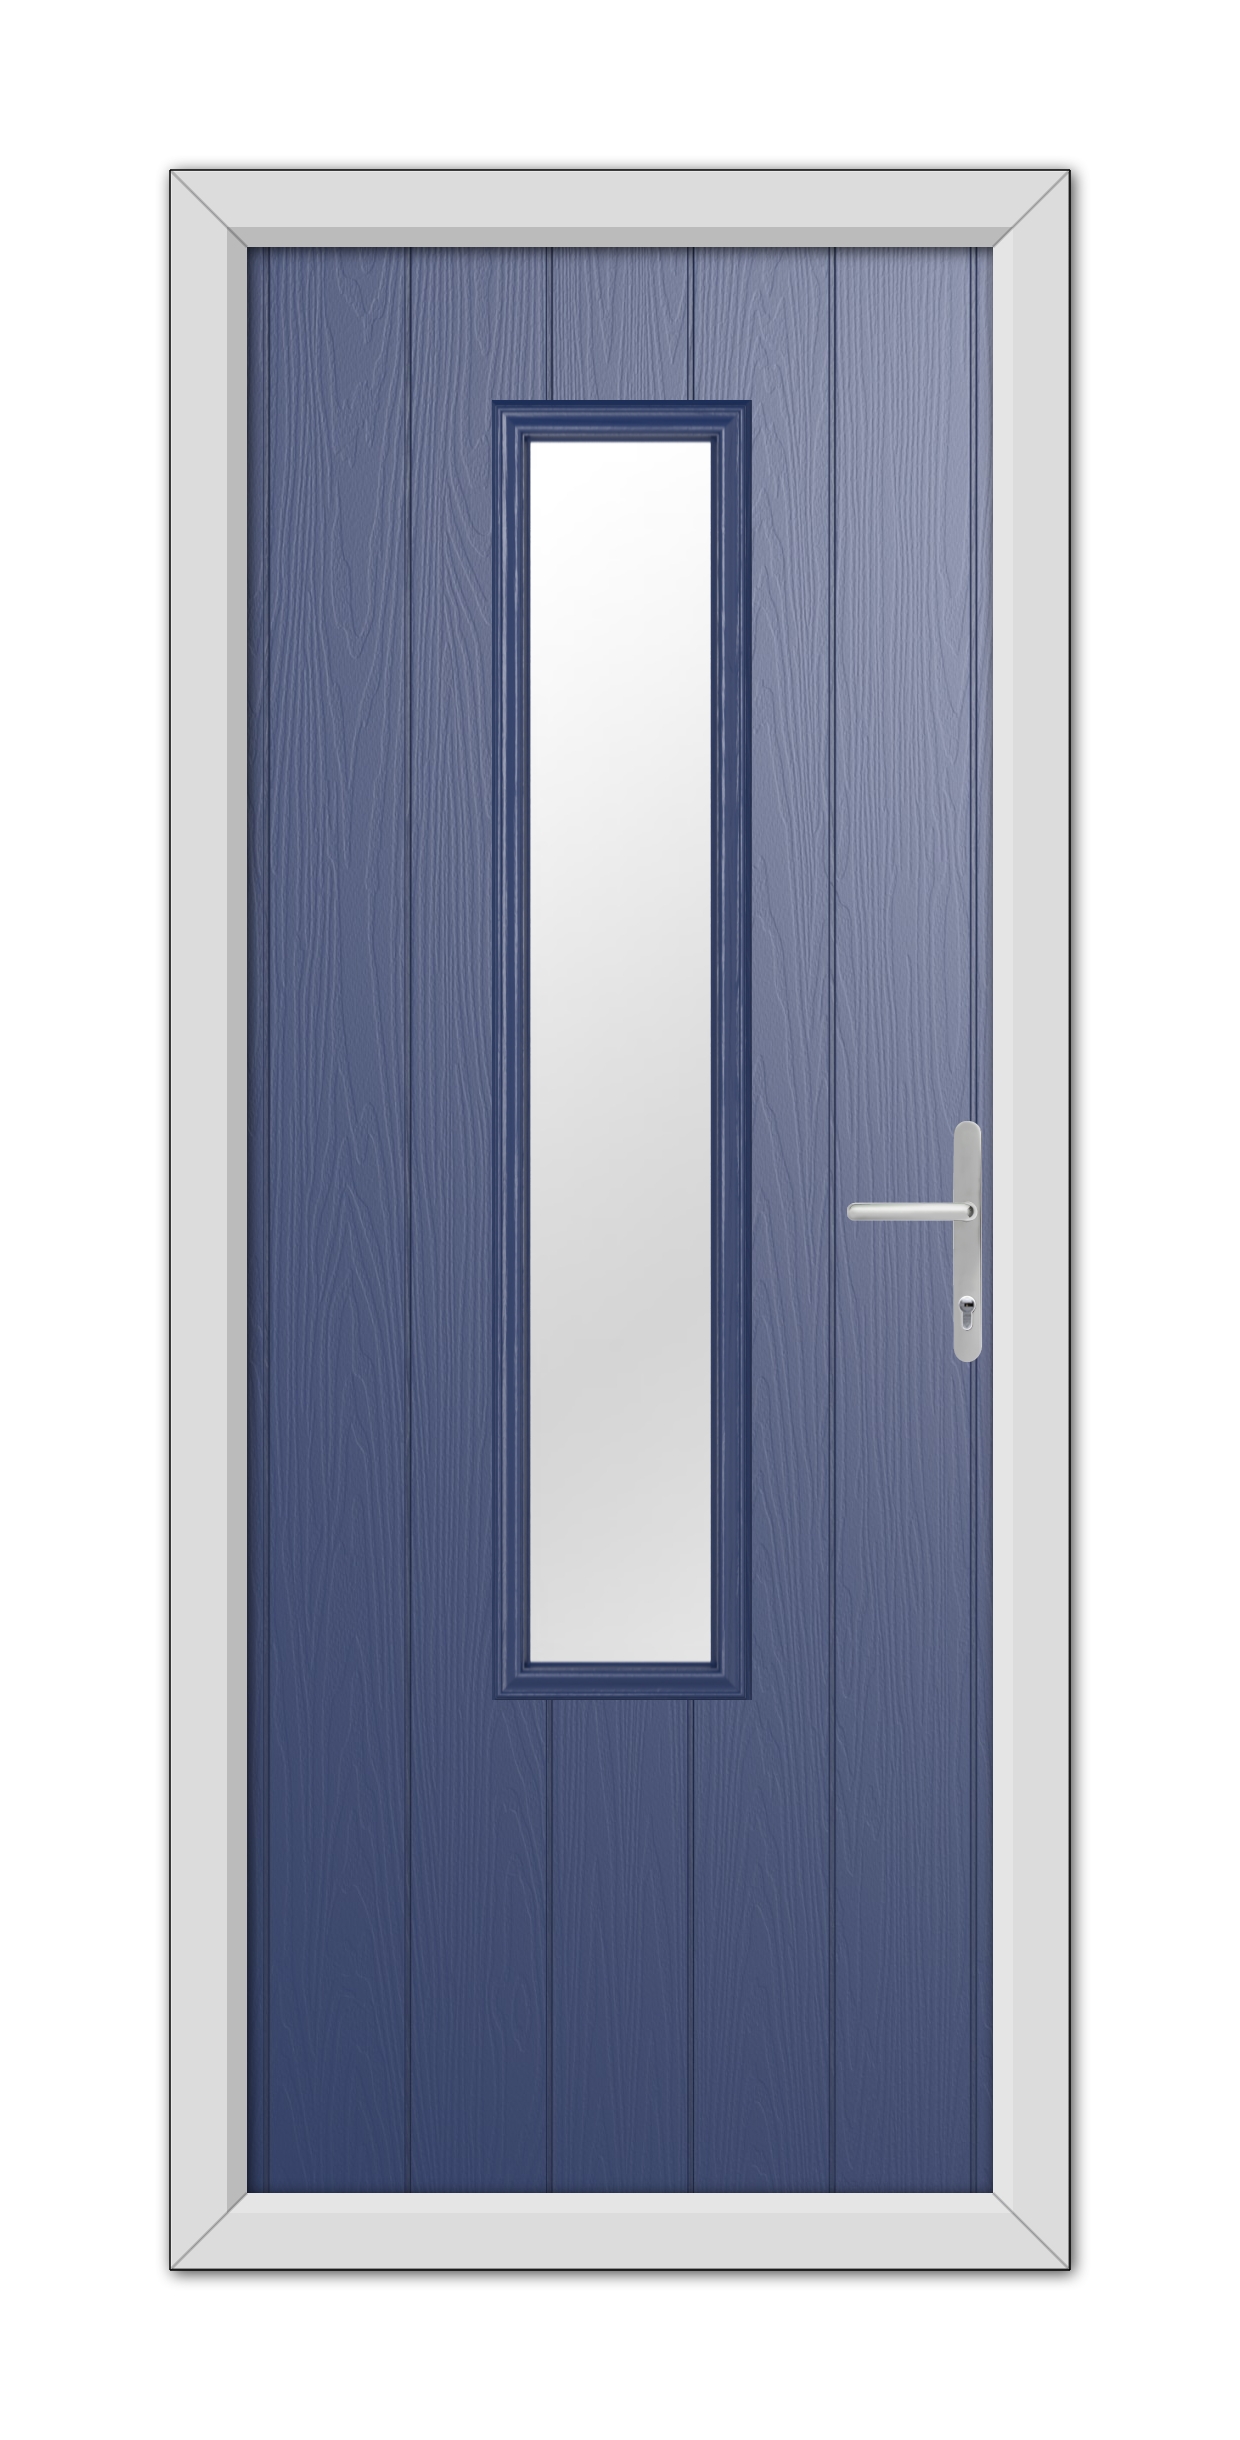 A Blue Abercorn Composite Door 48mm Timber Core with a vertical rectangular window and a silver handle, framed within a white door frame.